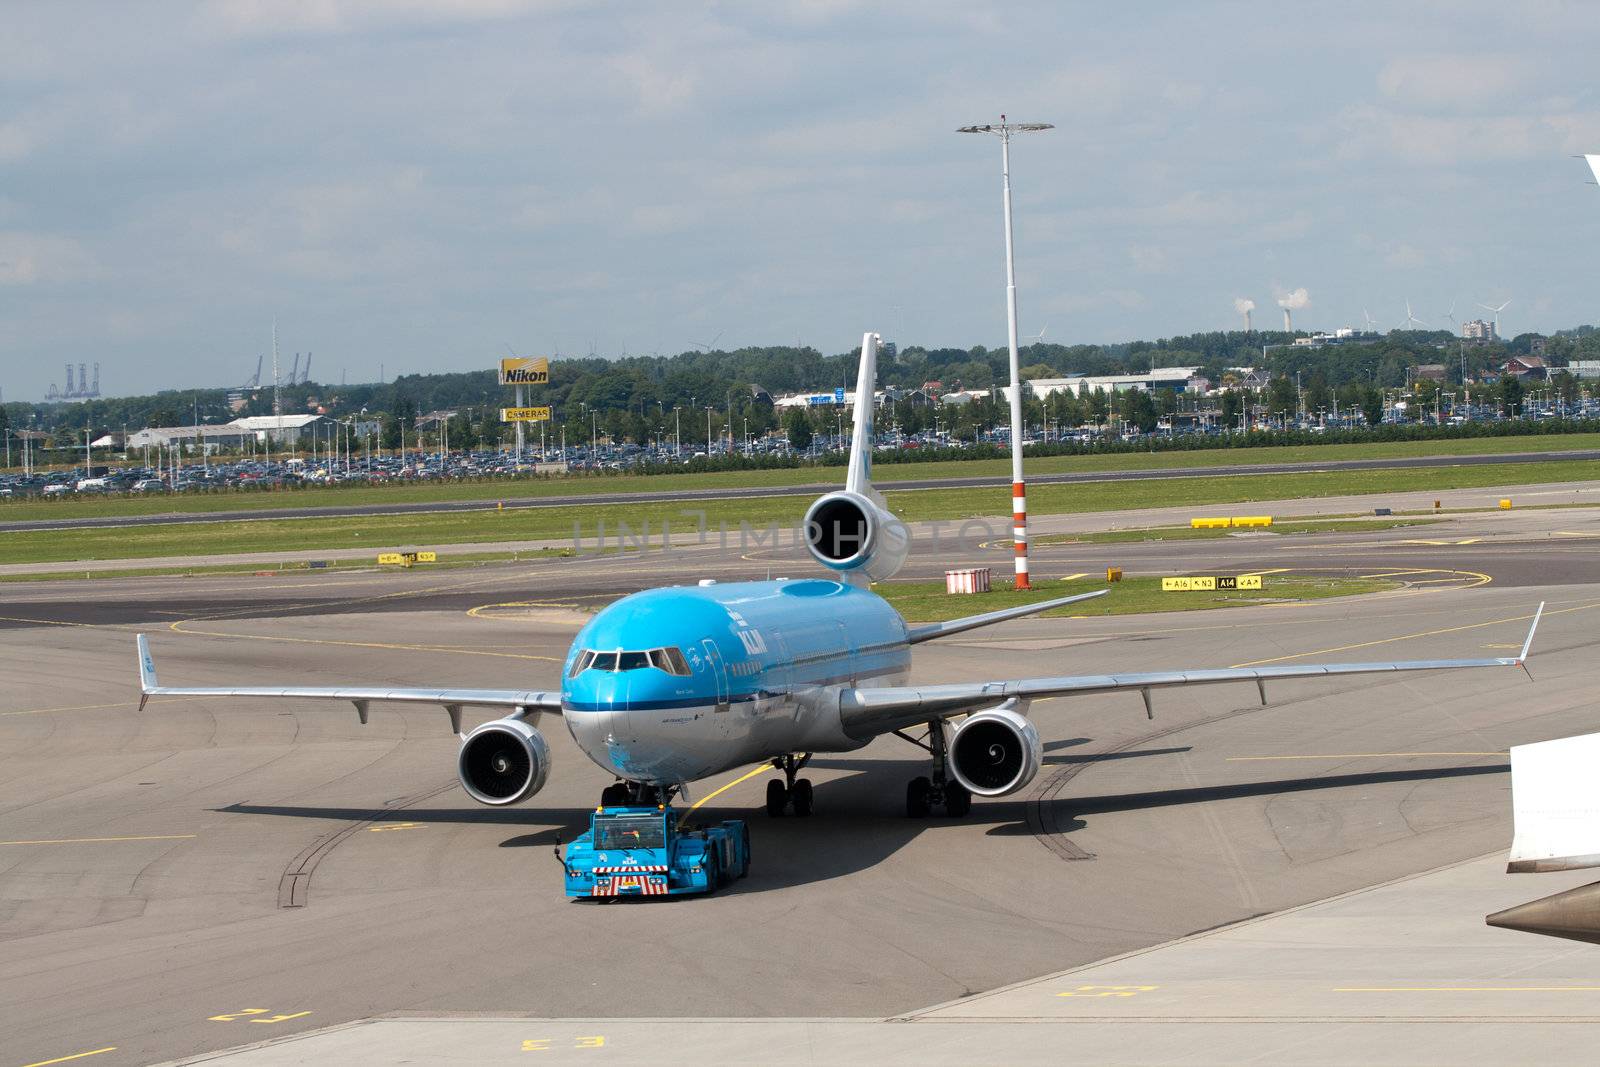 KLM McDonnell Douglas MD-11 at Schiphol airport by ints